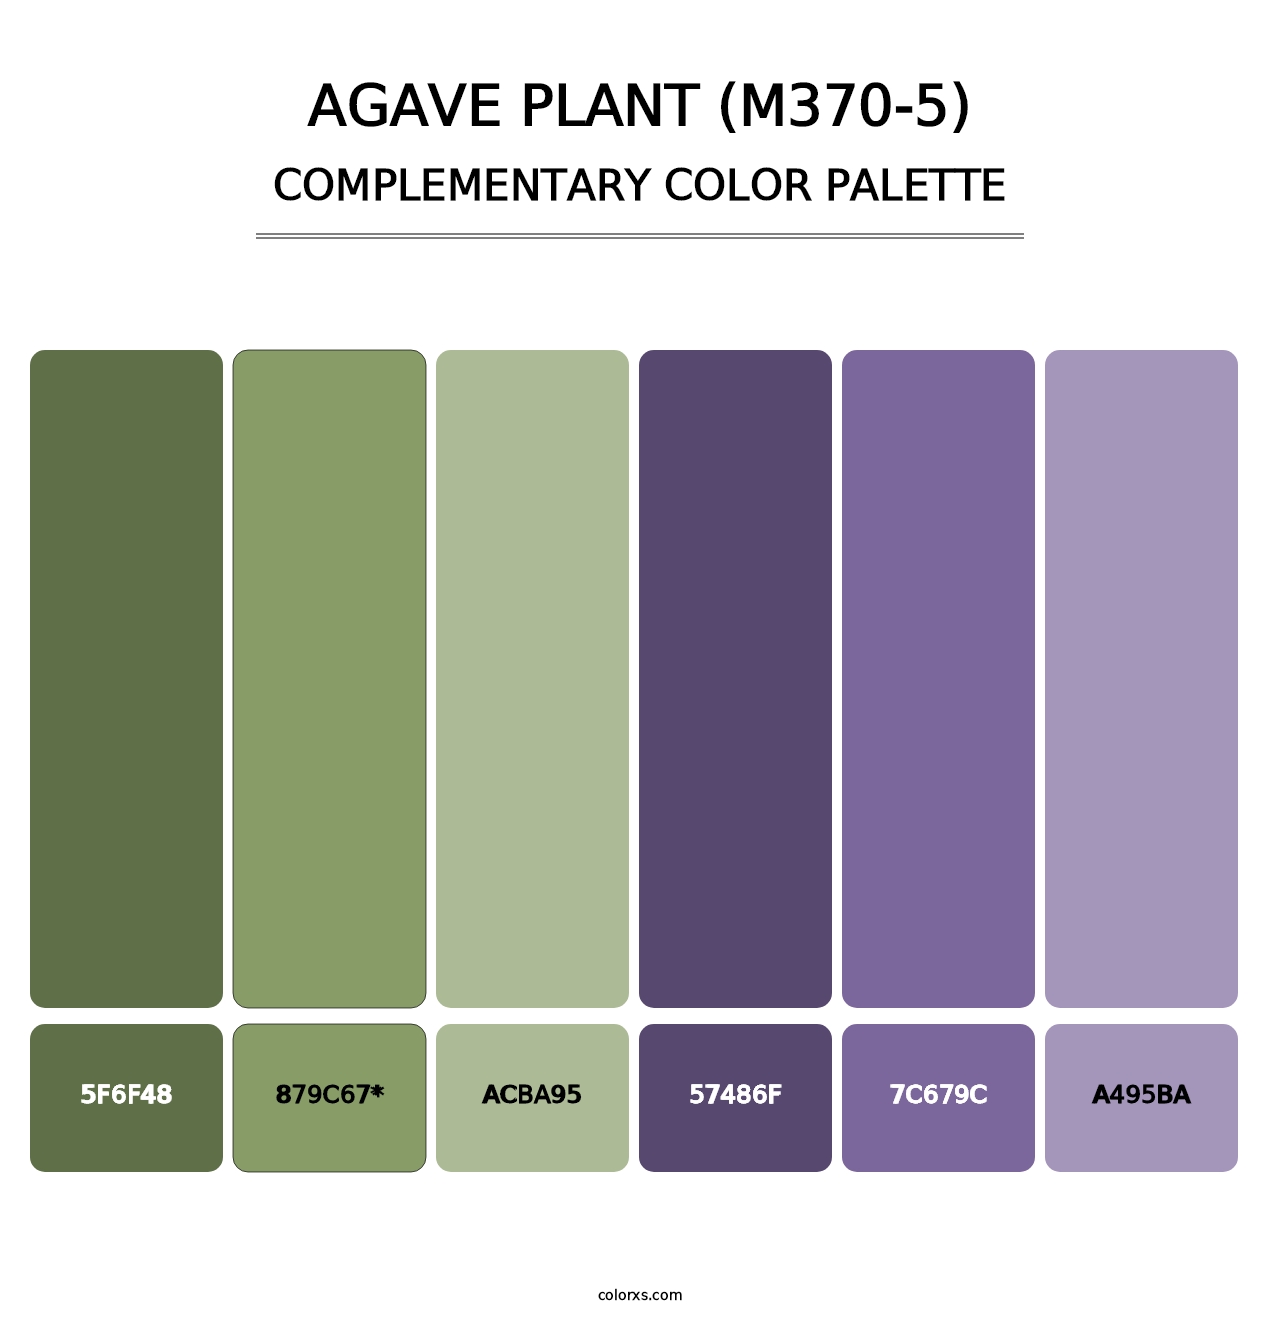 Agave Plant (M370-5) - Complementary Color Palette